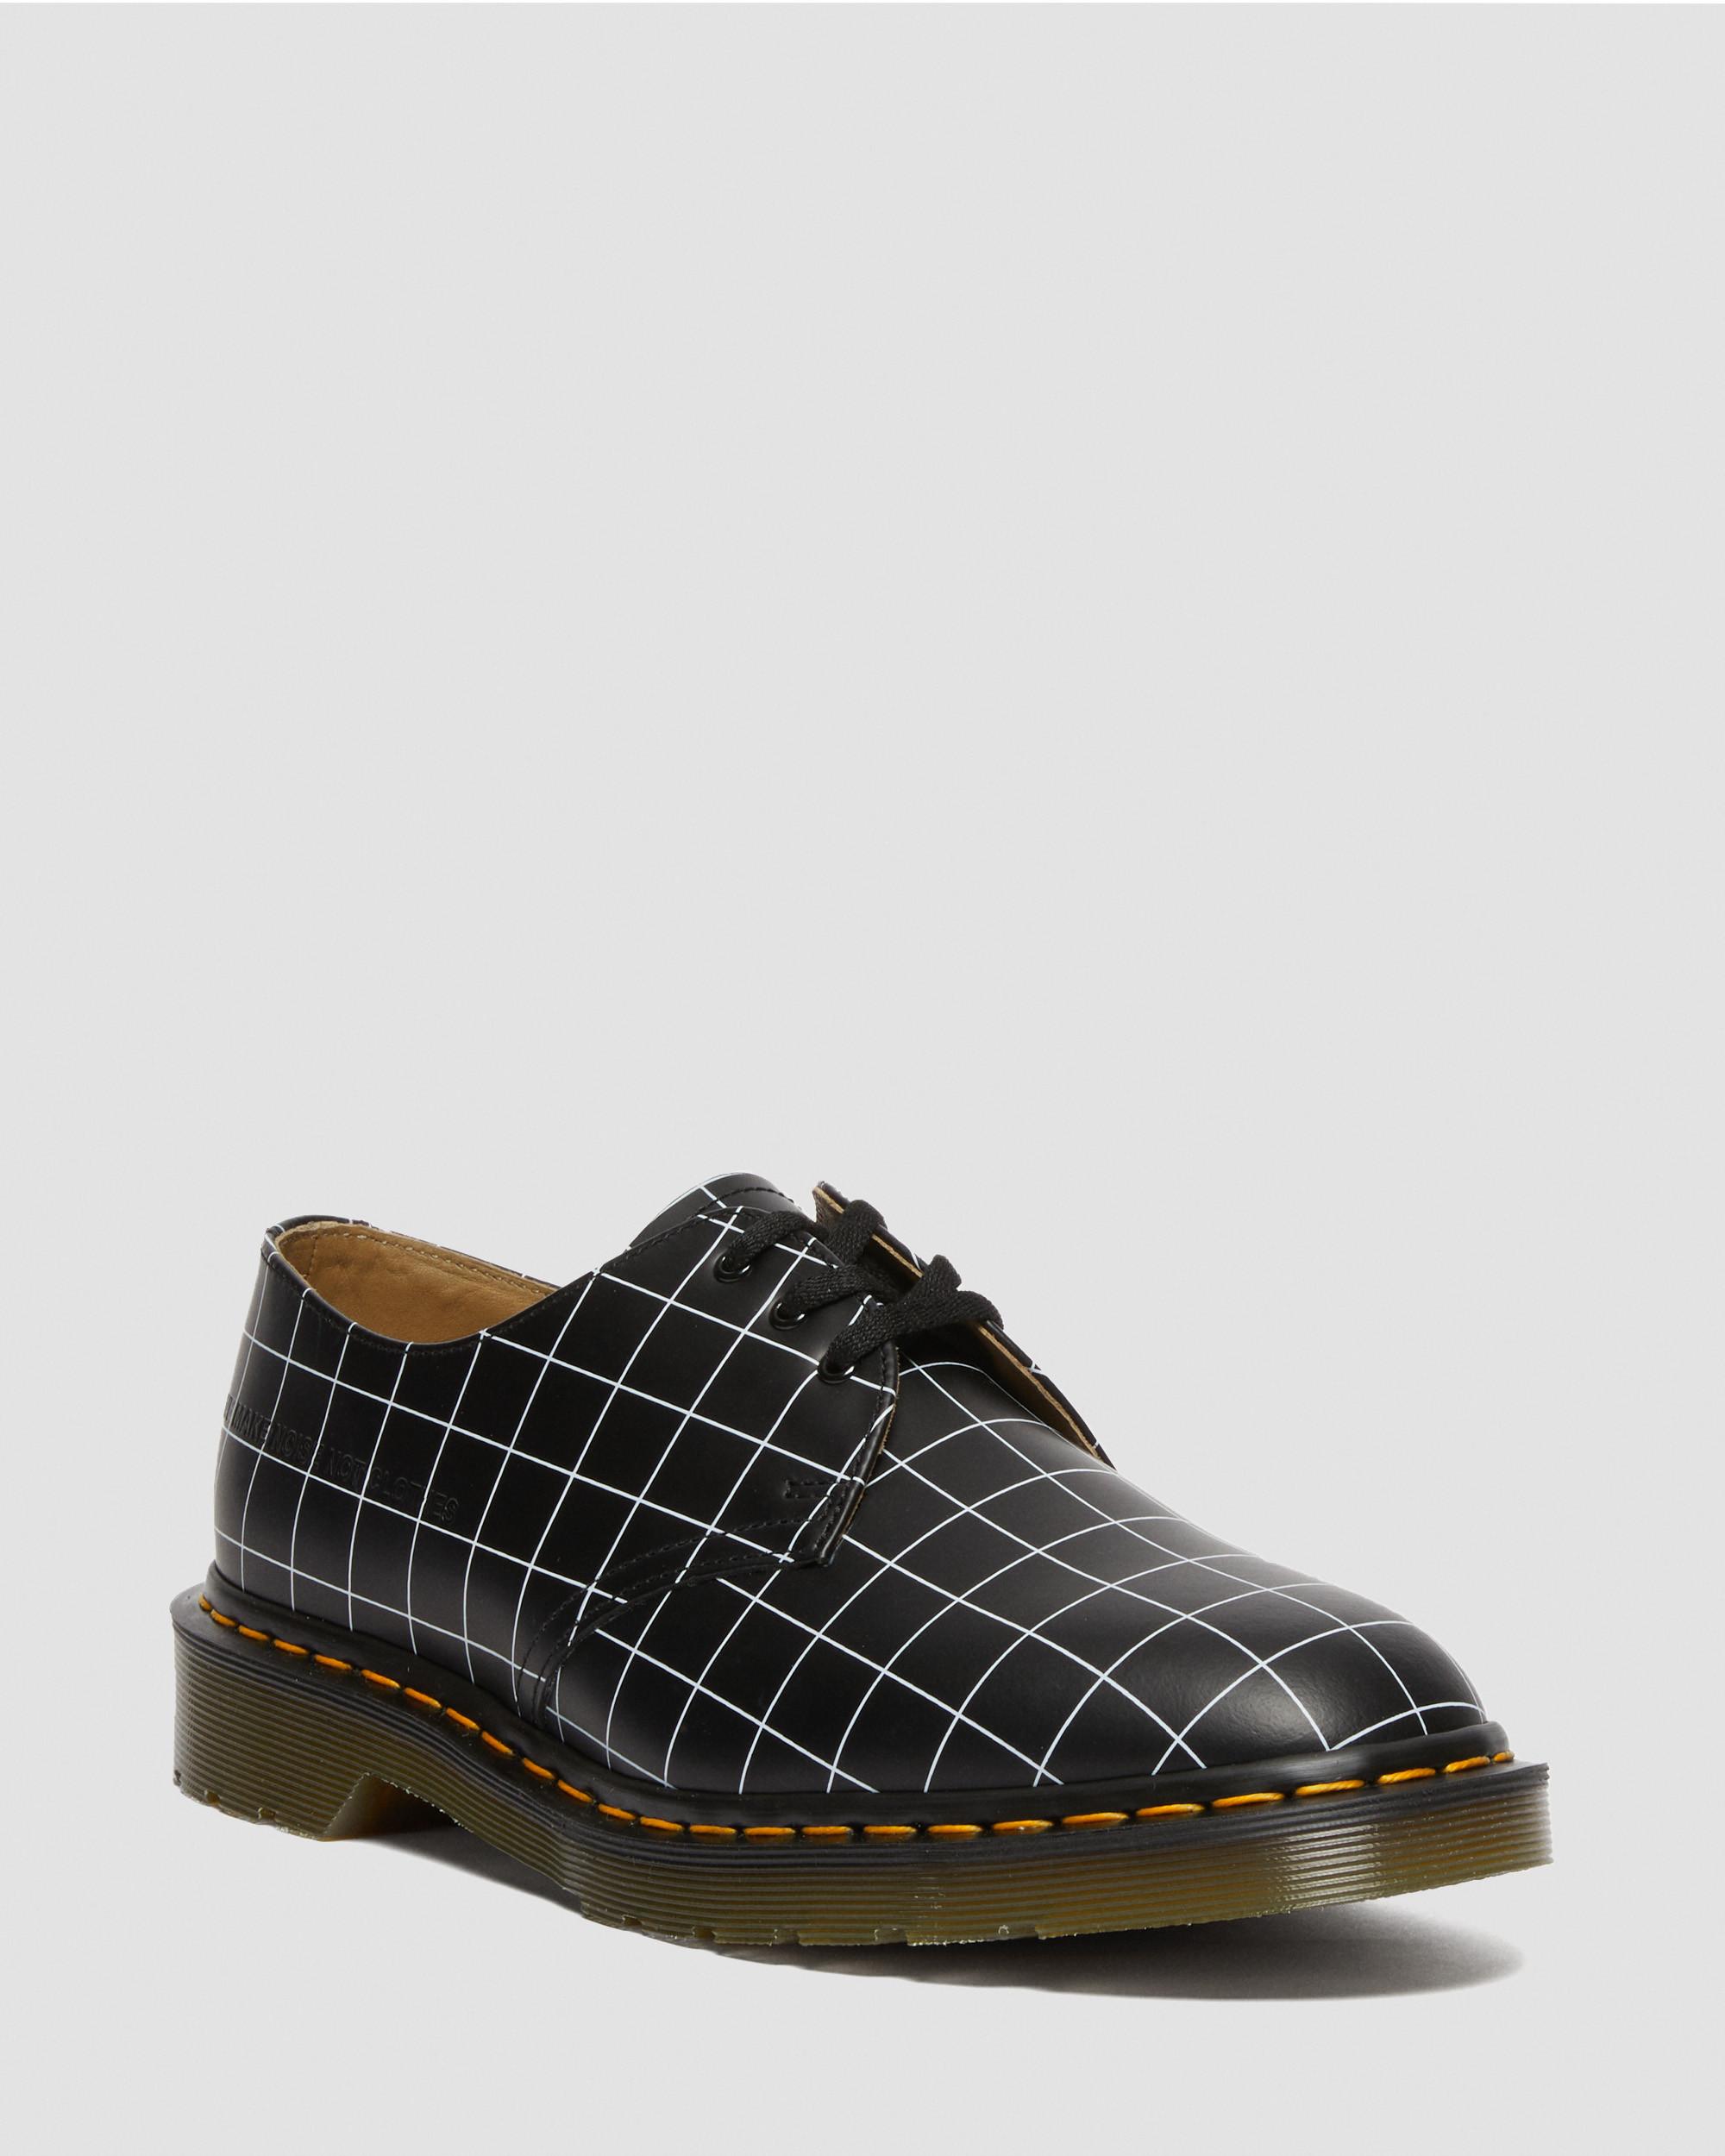 1461 Undercover Made in England Leather Oxford Shoes in Black | Dr. Martens